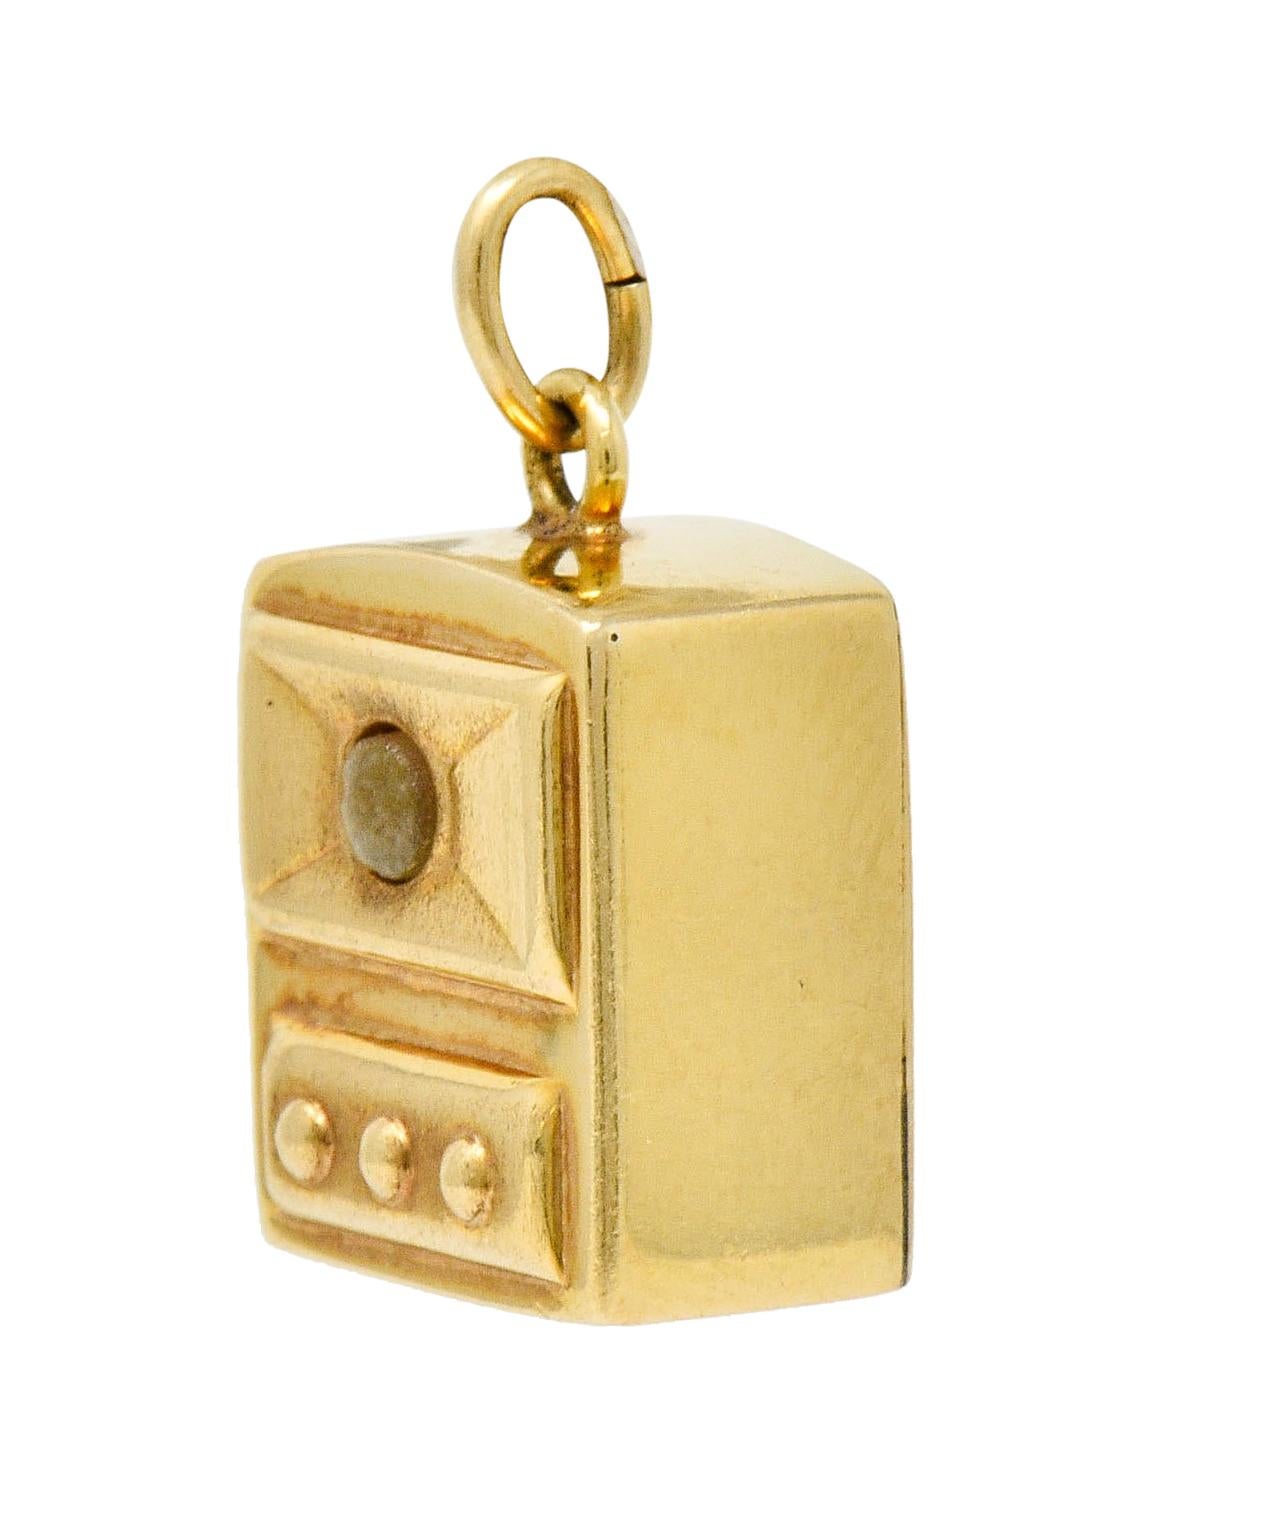 Rectangular form designed as a stylized vintage television

Centering a 2.5 mm round rock crystal cabochon peephole

Viewing through peephole depicts a microphotograph of popular New York icons; 

Statue of Liberty, Empire State Building, and the